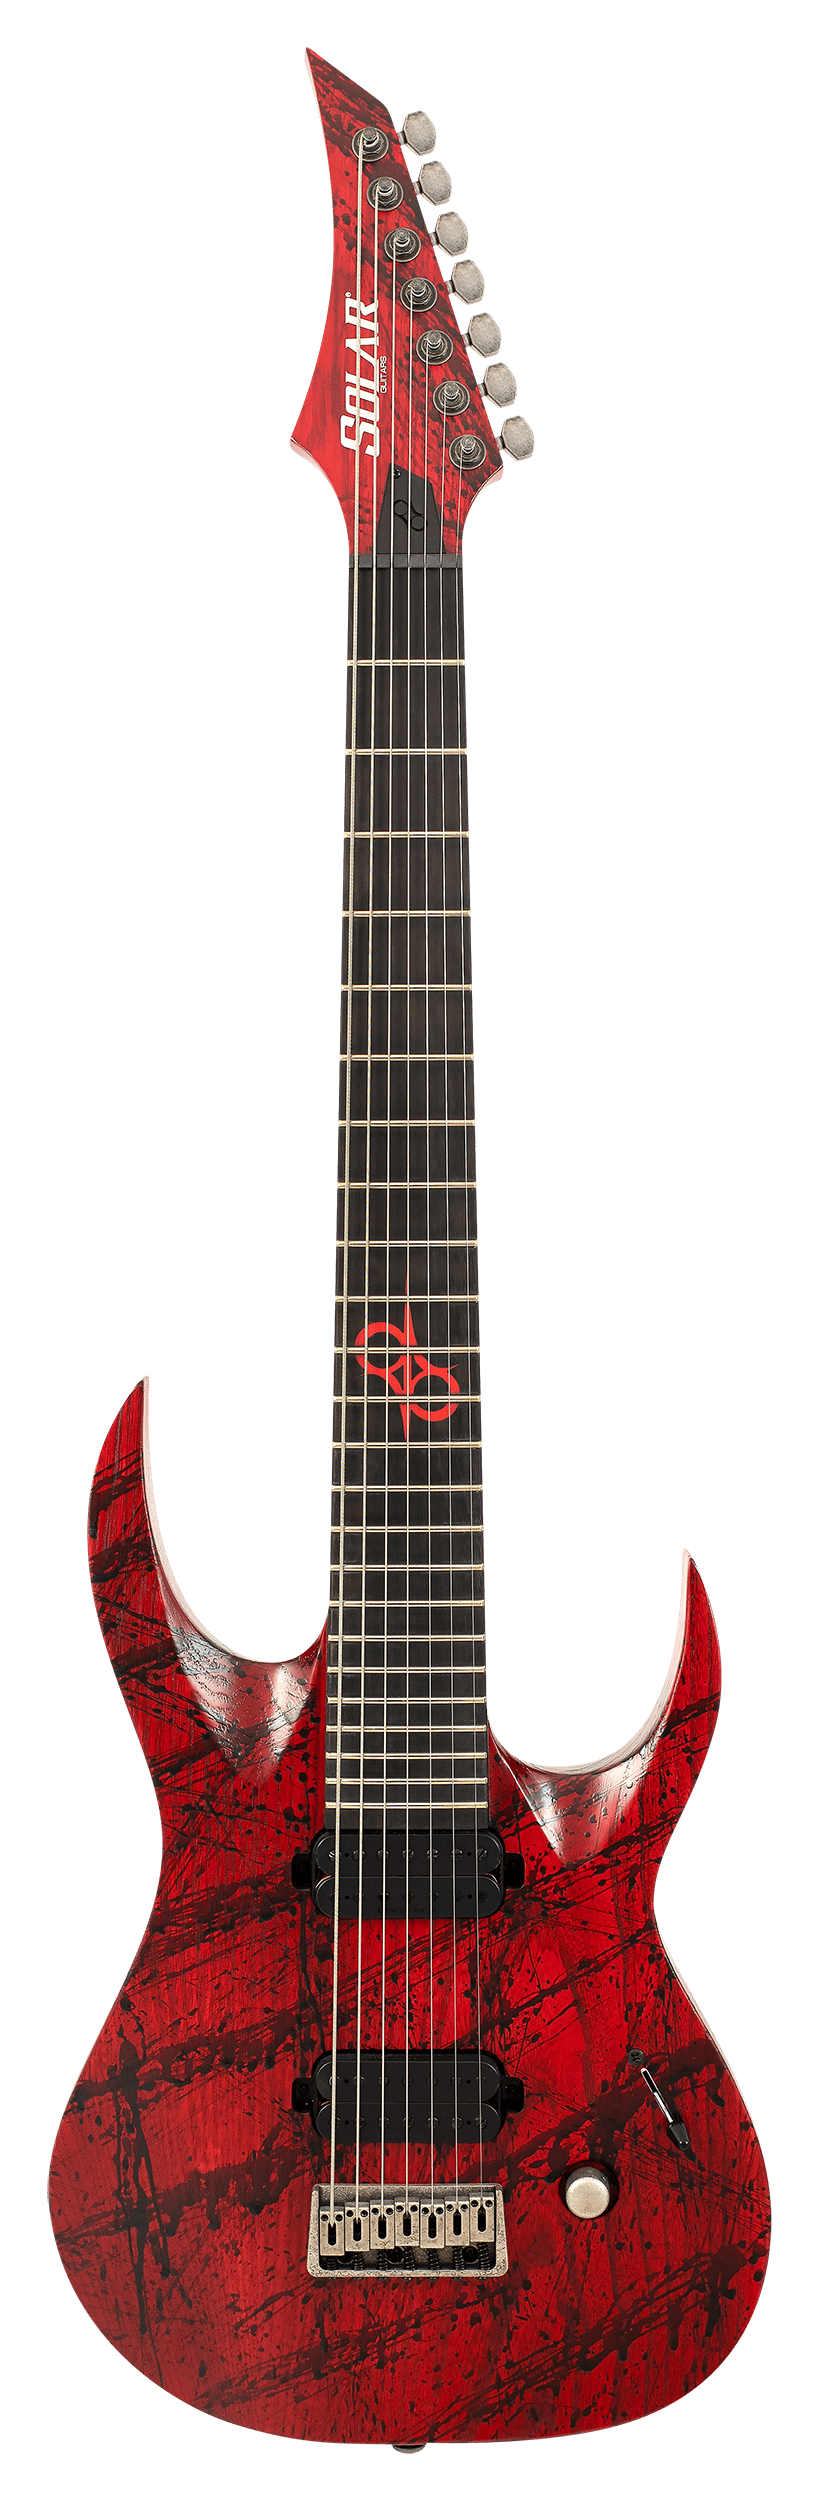  /   SOLAR GUITARS A2.7CANIBALISMO+ BLOOD RED OPEN PORE W/BLOOD SPLAT